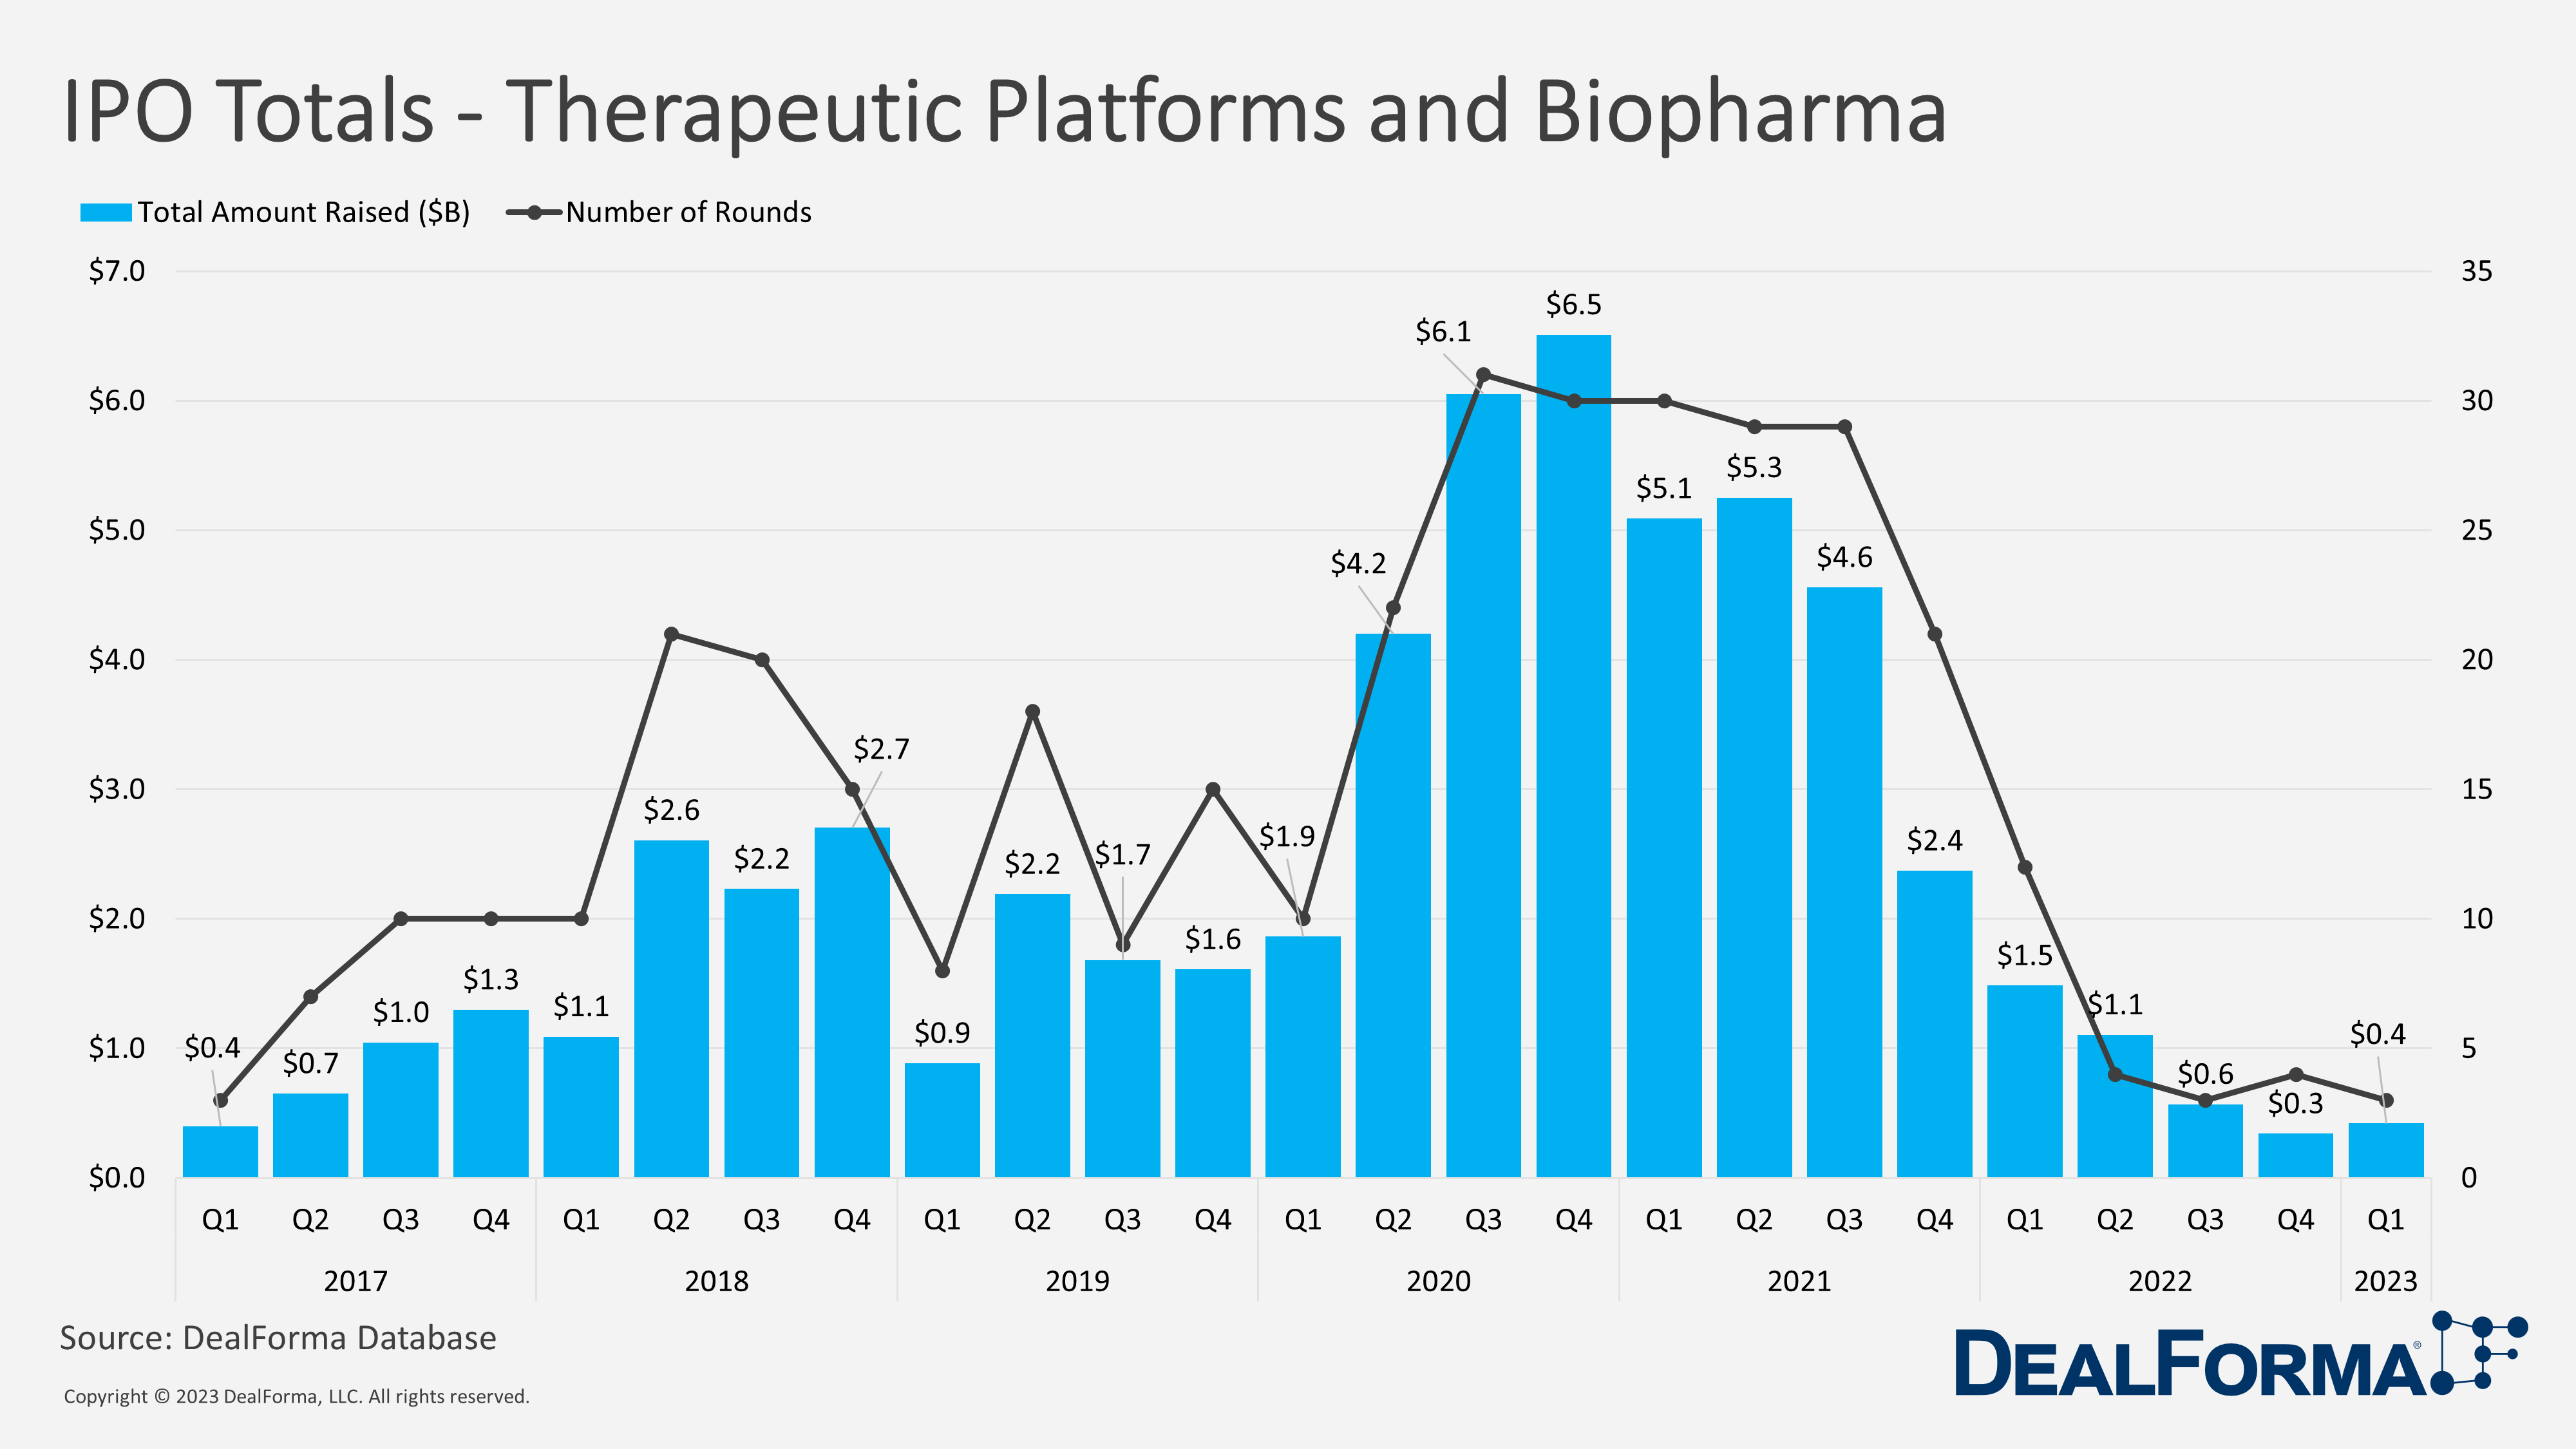 IPO Totals - Therapeutic Platforms and Biopharma